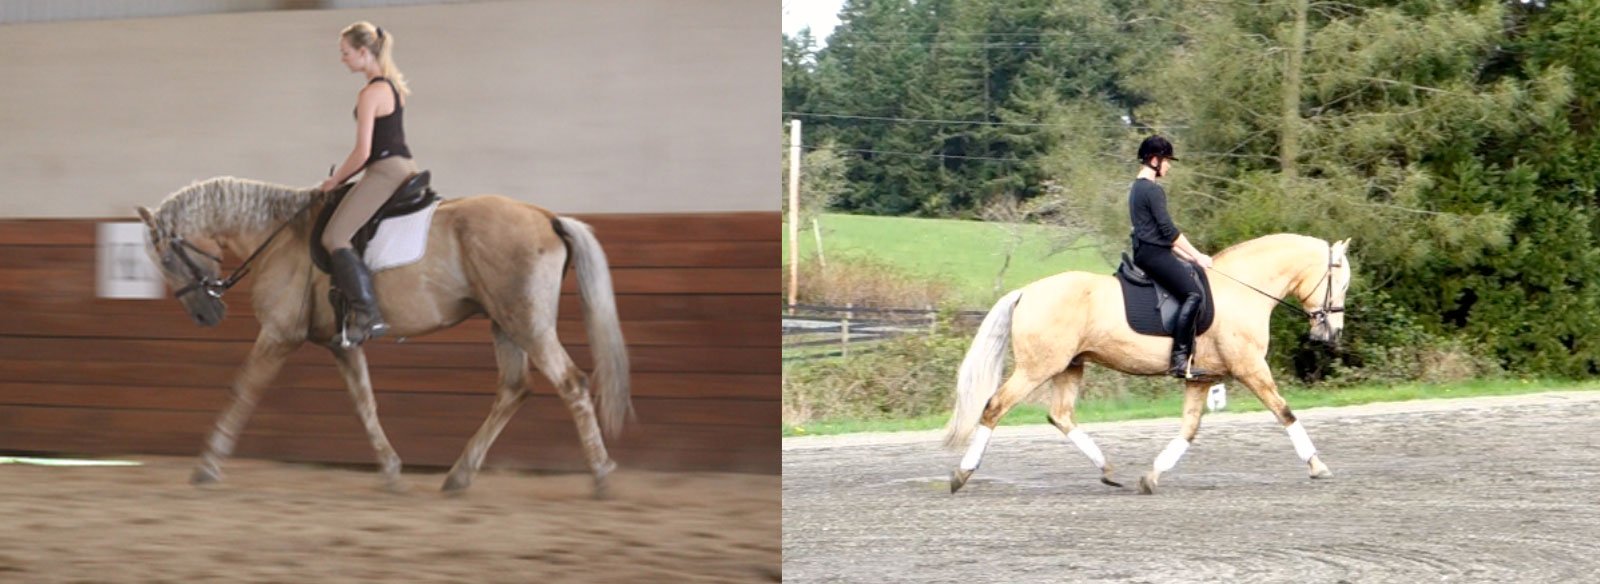 Legacy-trot-before-and-after.jpg